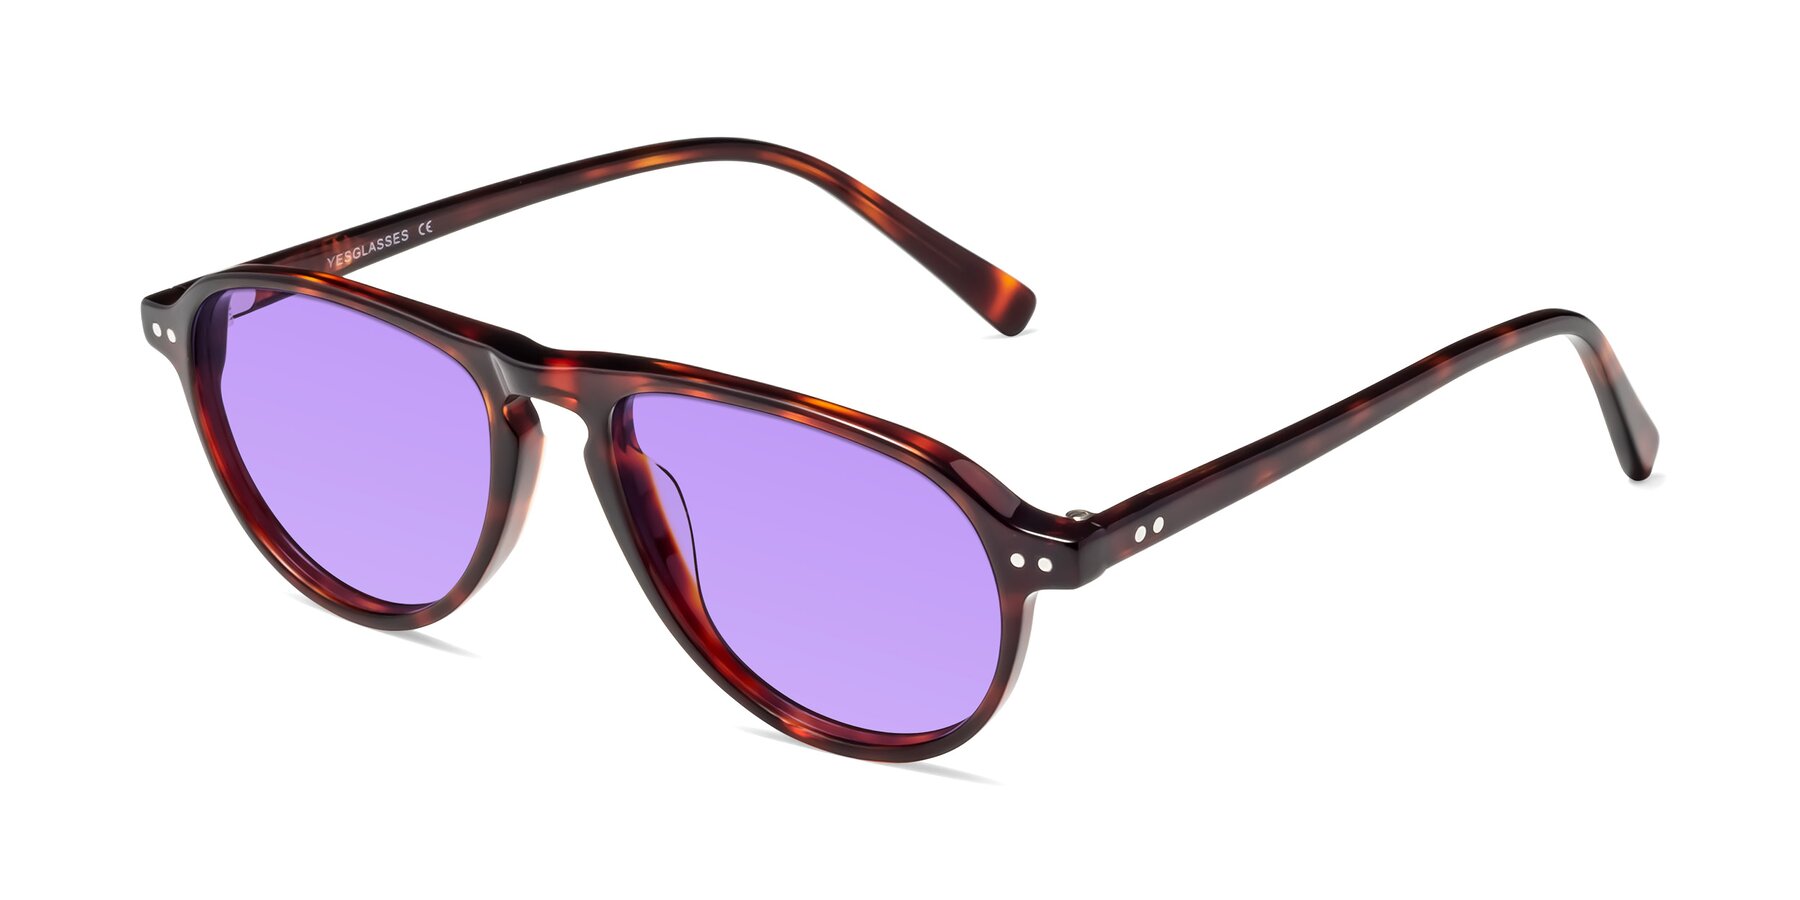 Angle of 17544 in Burgundy Tortoise with Medium Purple Tinted Lenses